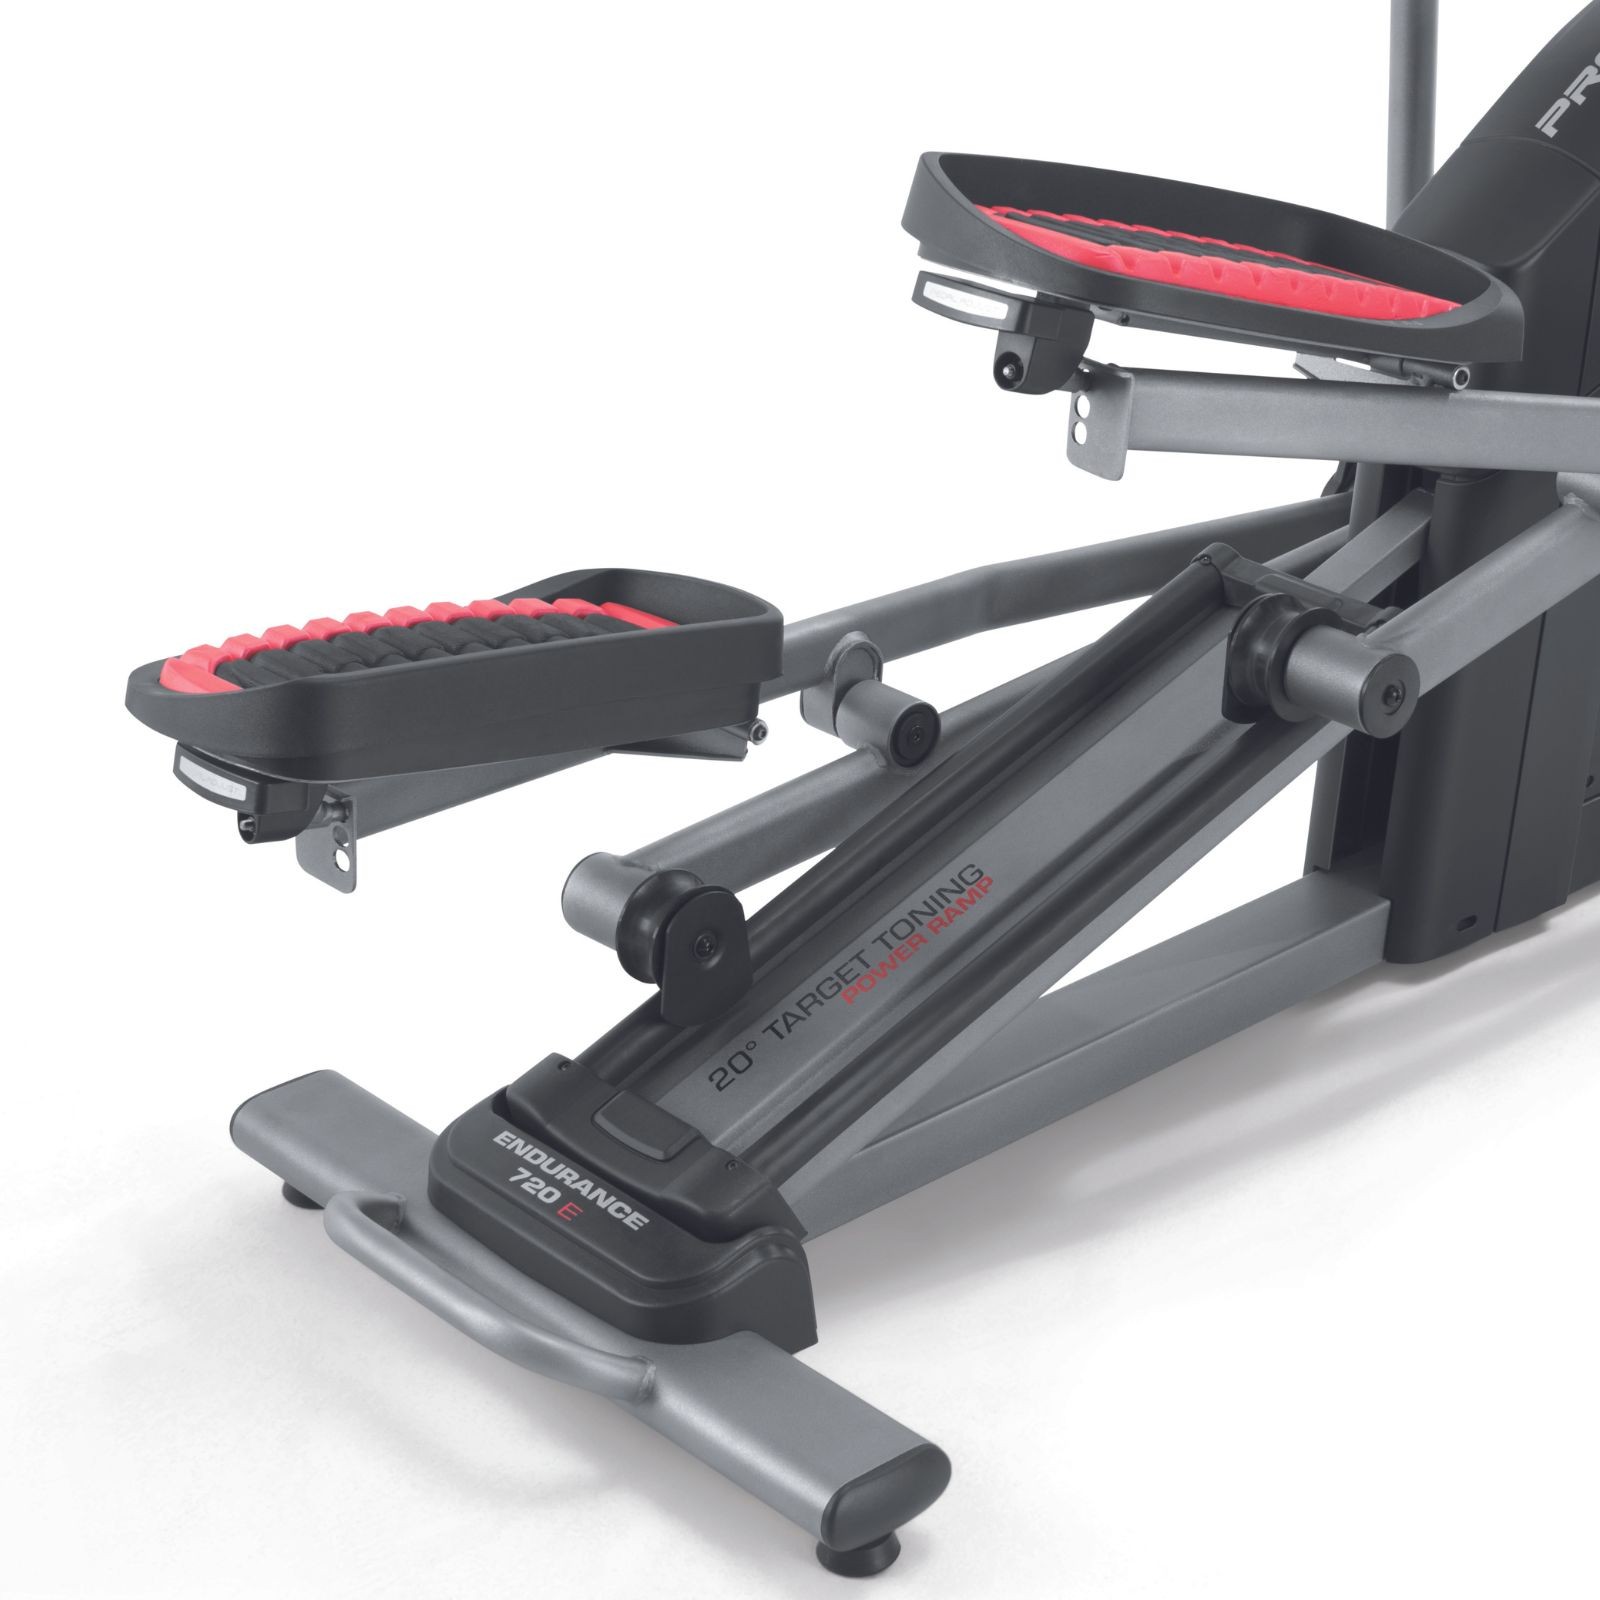 Customisable 20 levels of magnetic resistance, incline up to 20°, and adjustable stride length on the ProForm 720E Endurance Elliptical Cross Trainer.